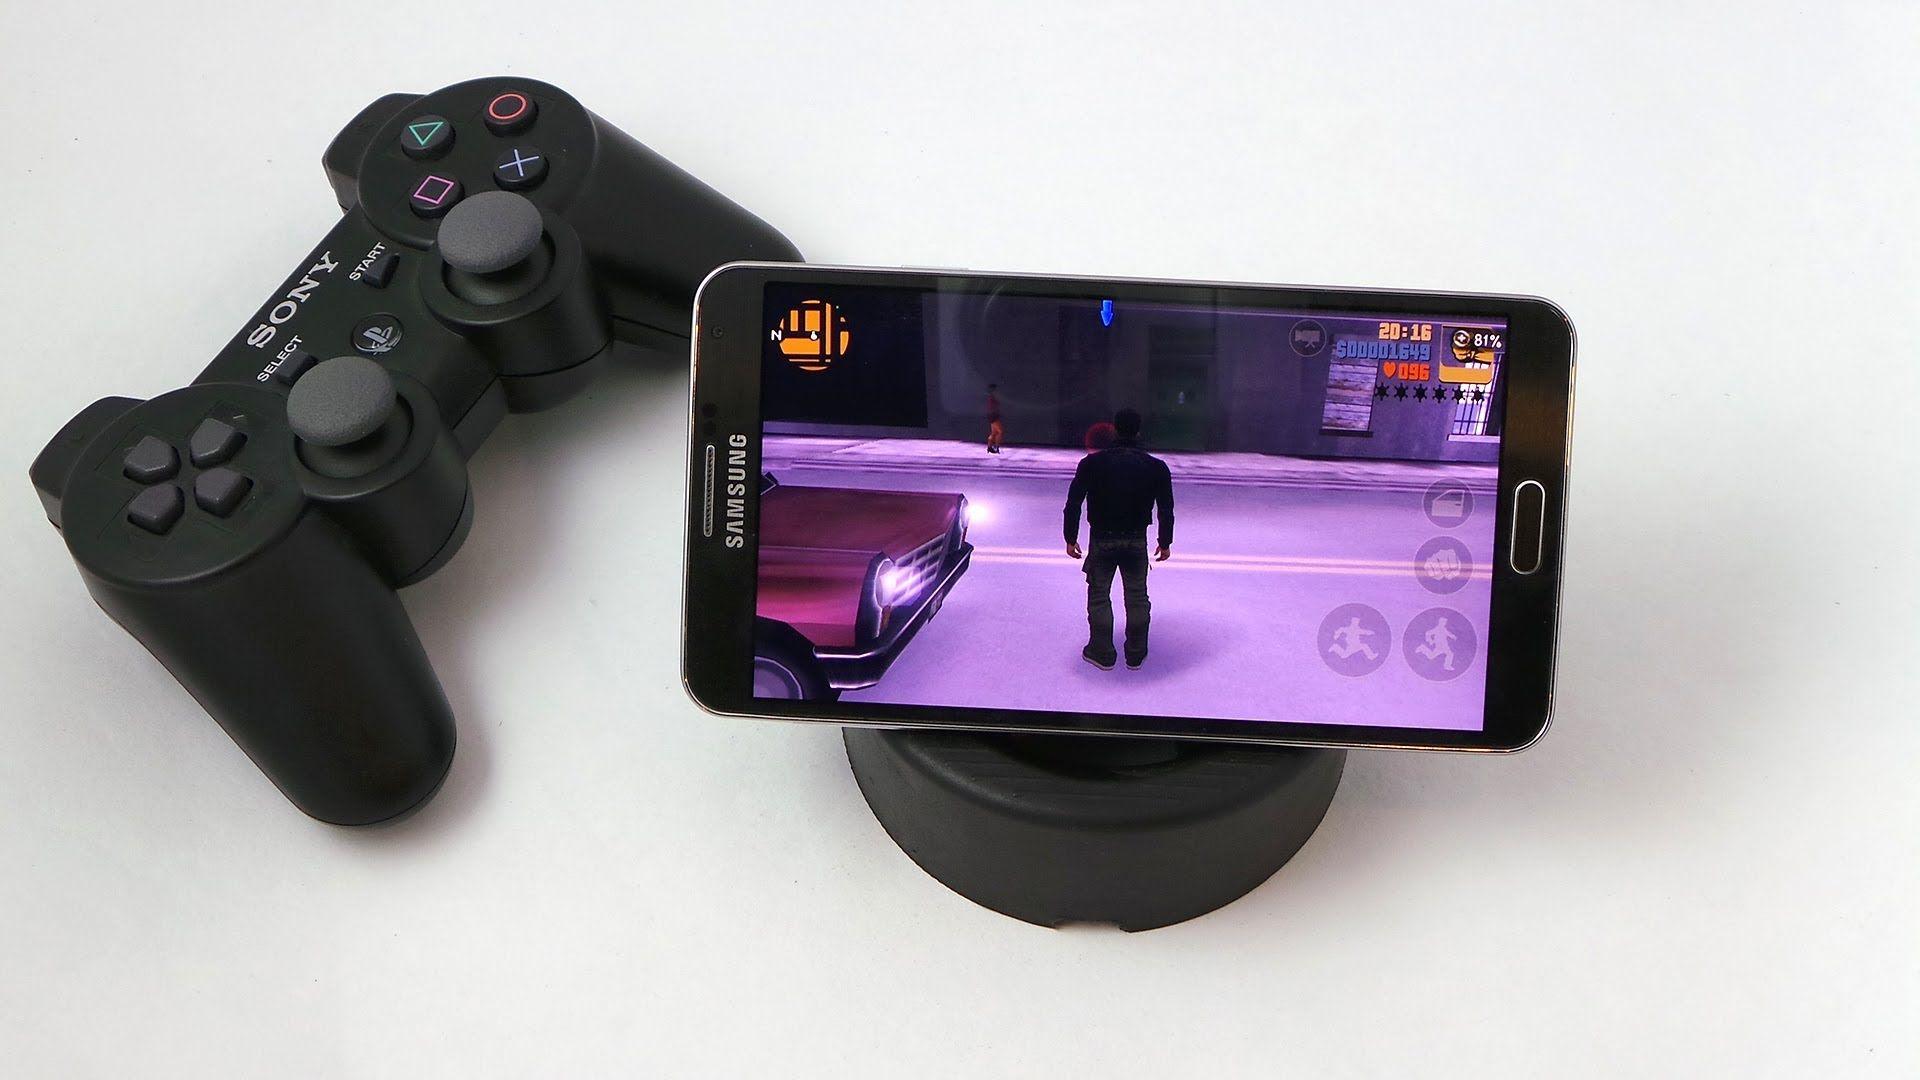 How to Pair / Connect PS3 Controller with Galaxy Note 3